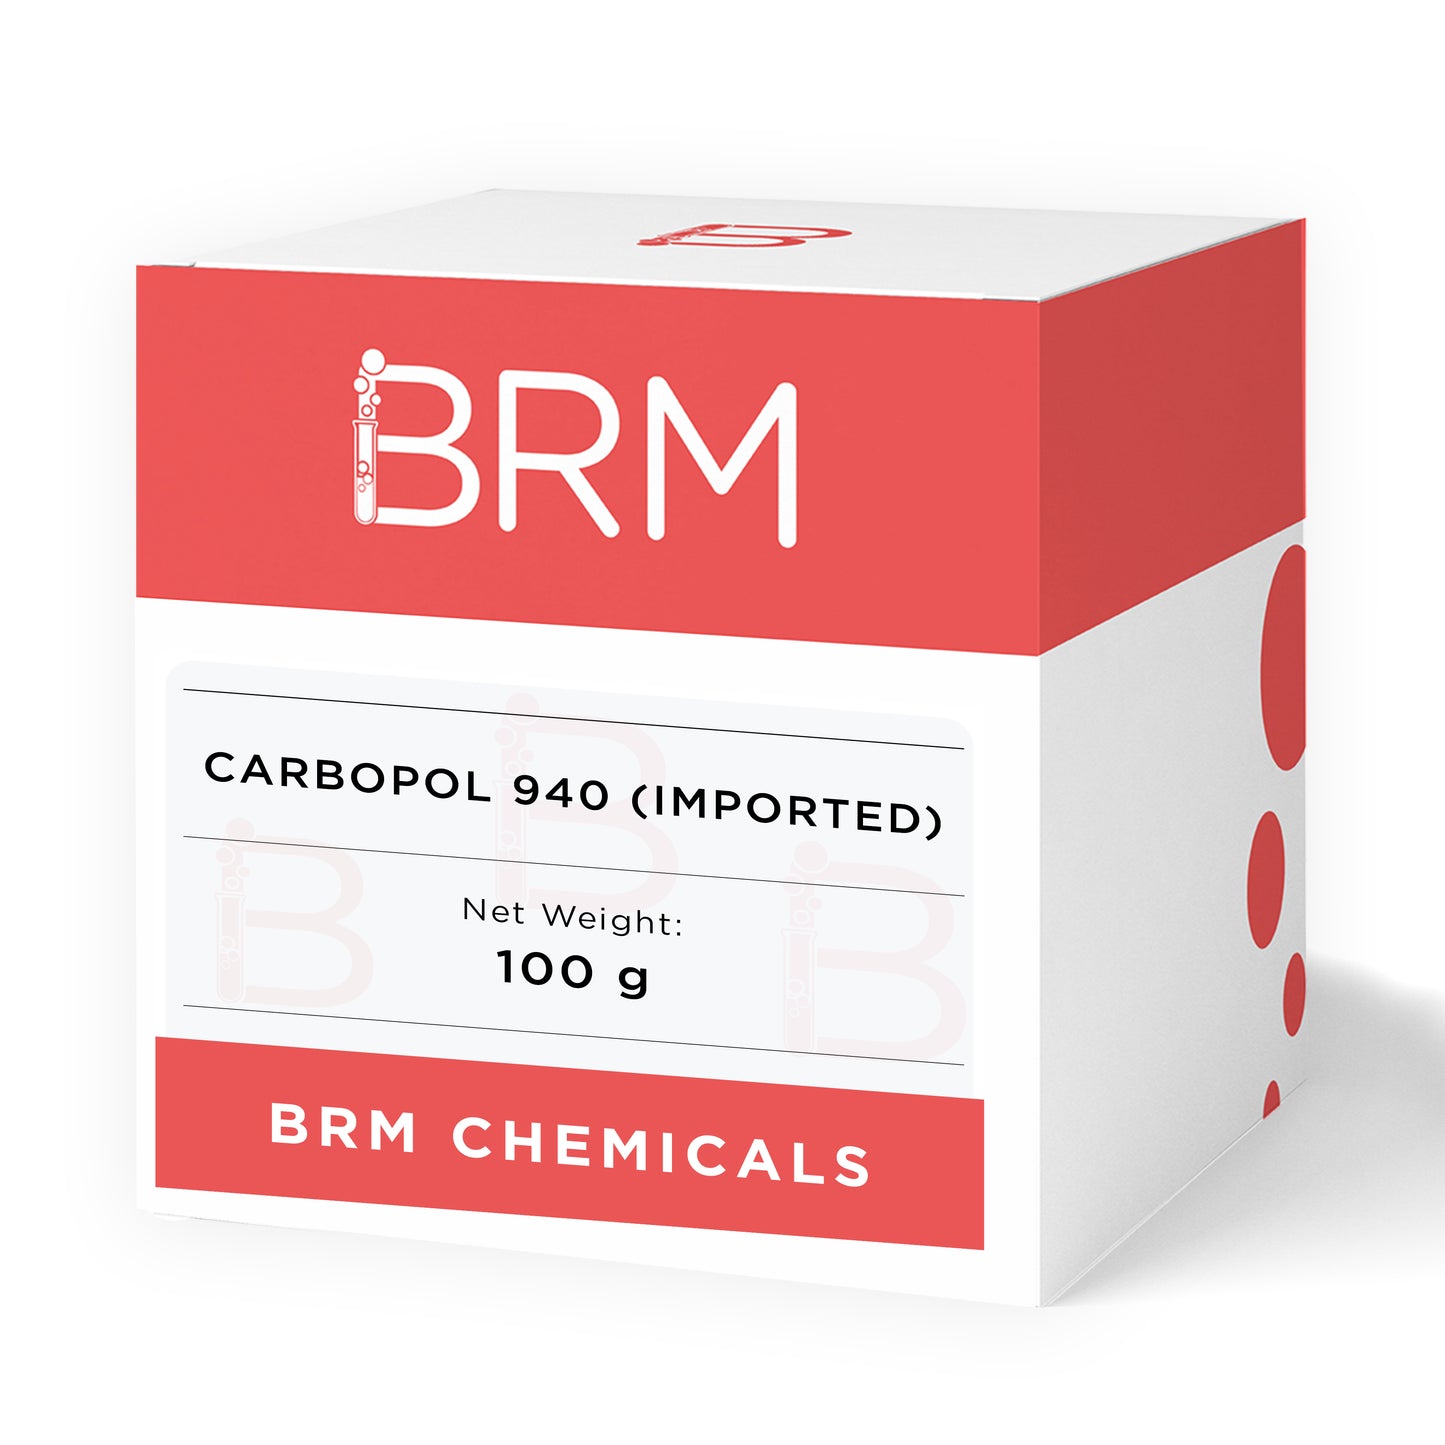 Carbopol 940 (Imported)